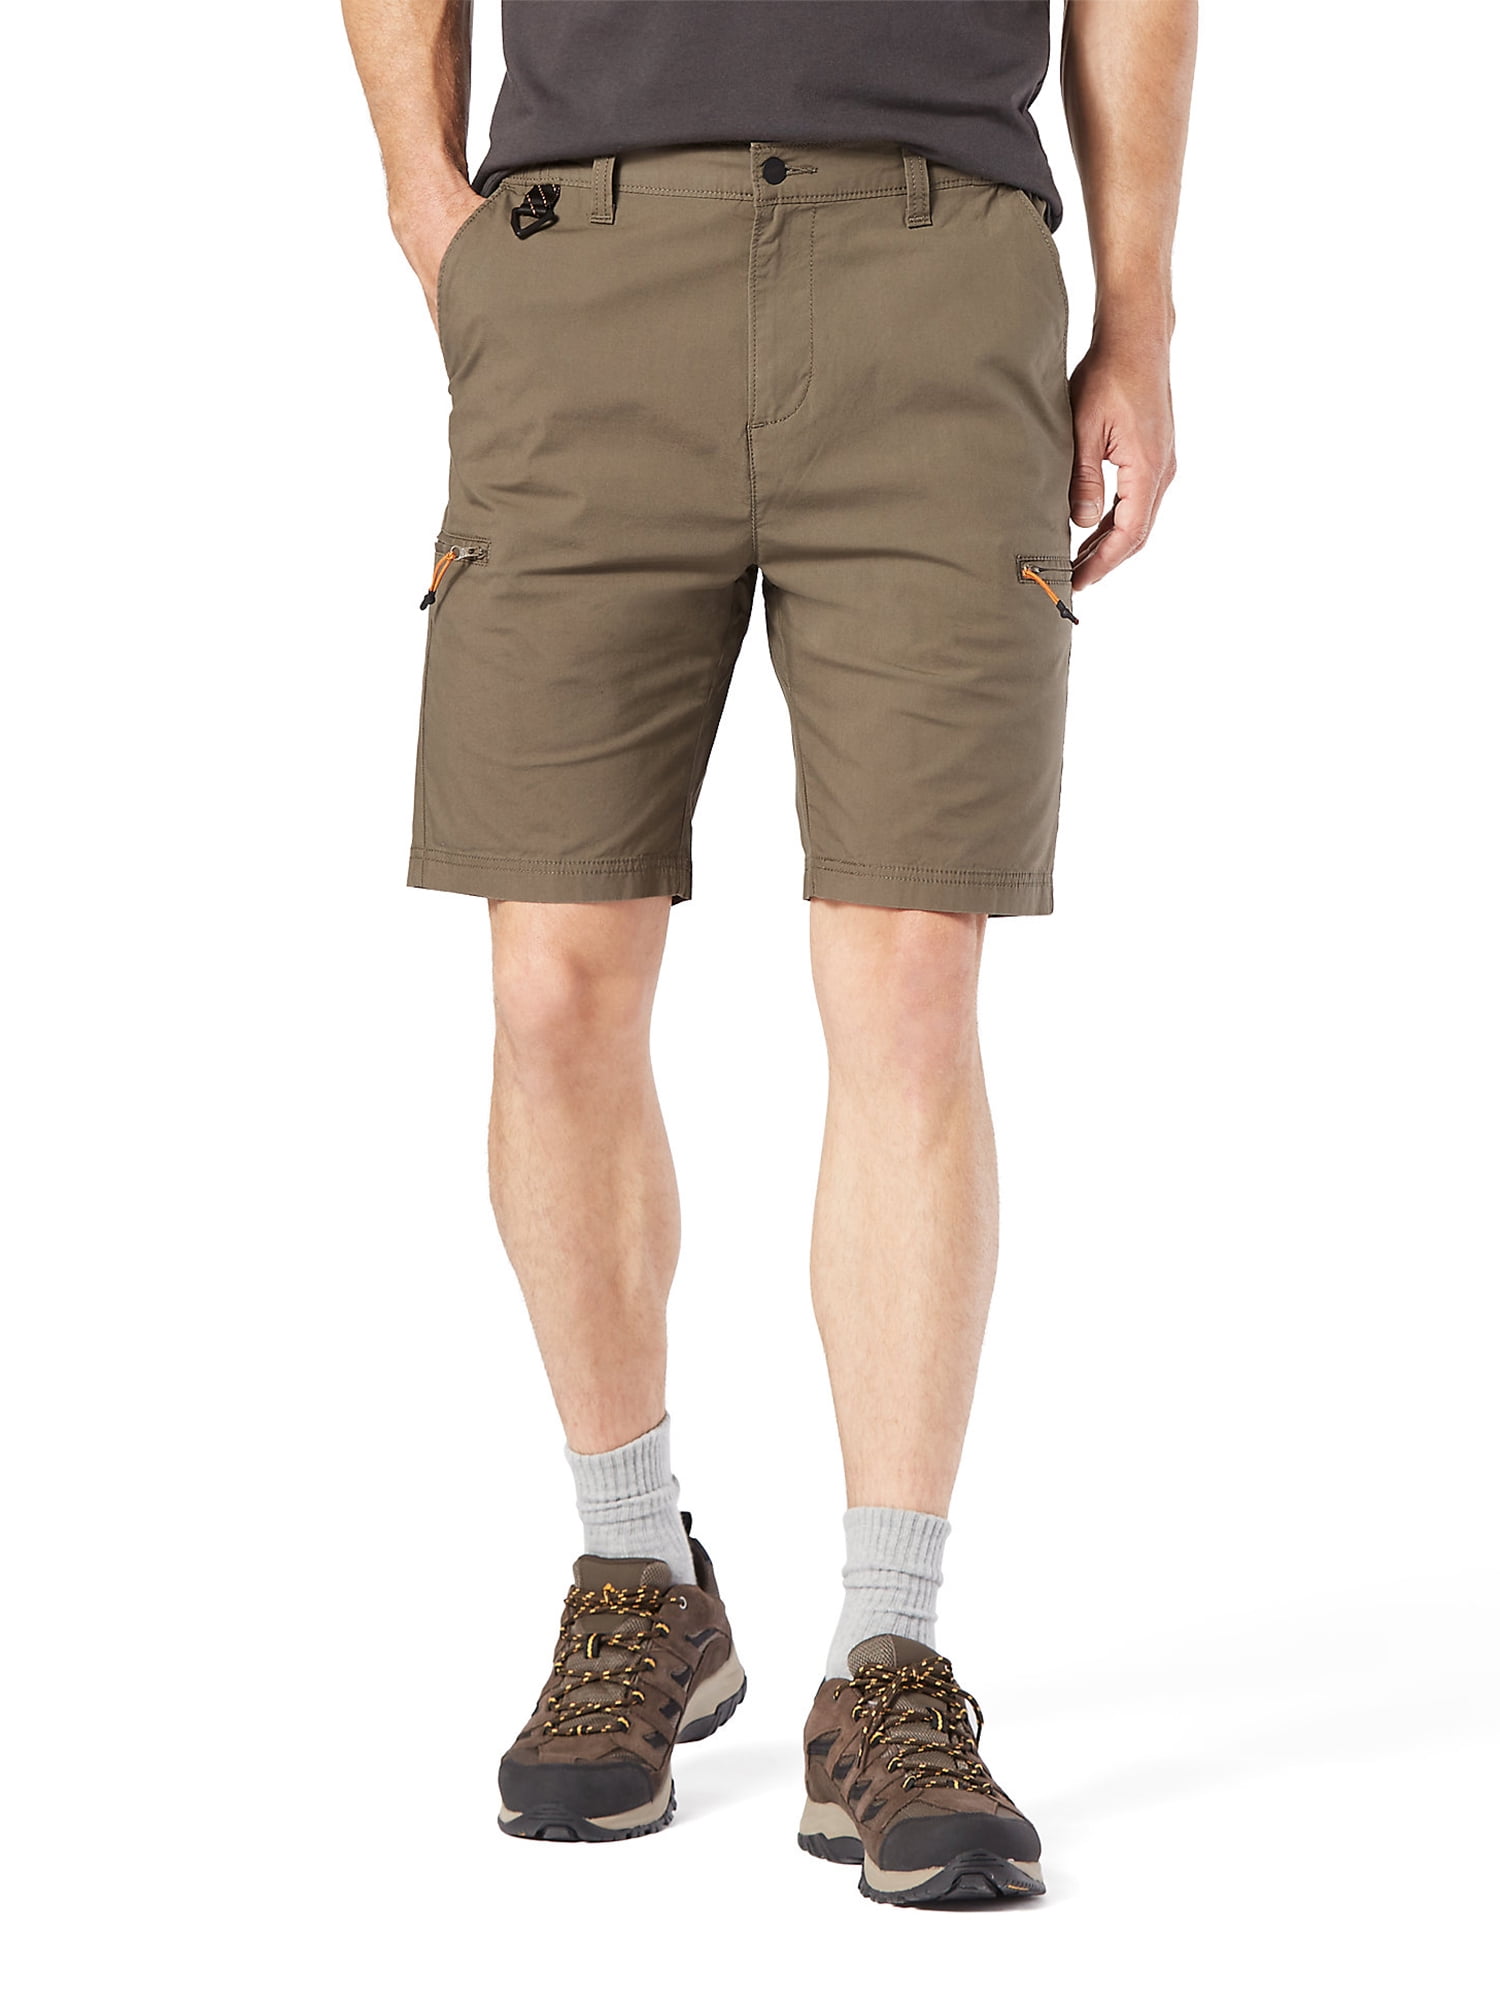 Signature by Levi Strauss & Co. Men's Outdoor Utility Hiking Short Size  28-44 